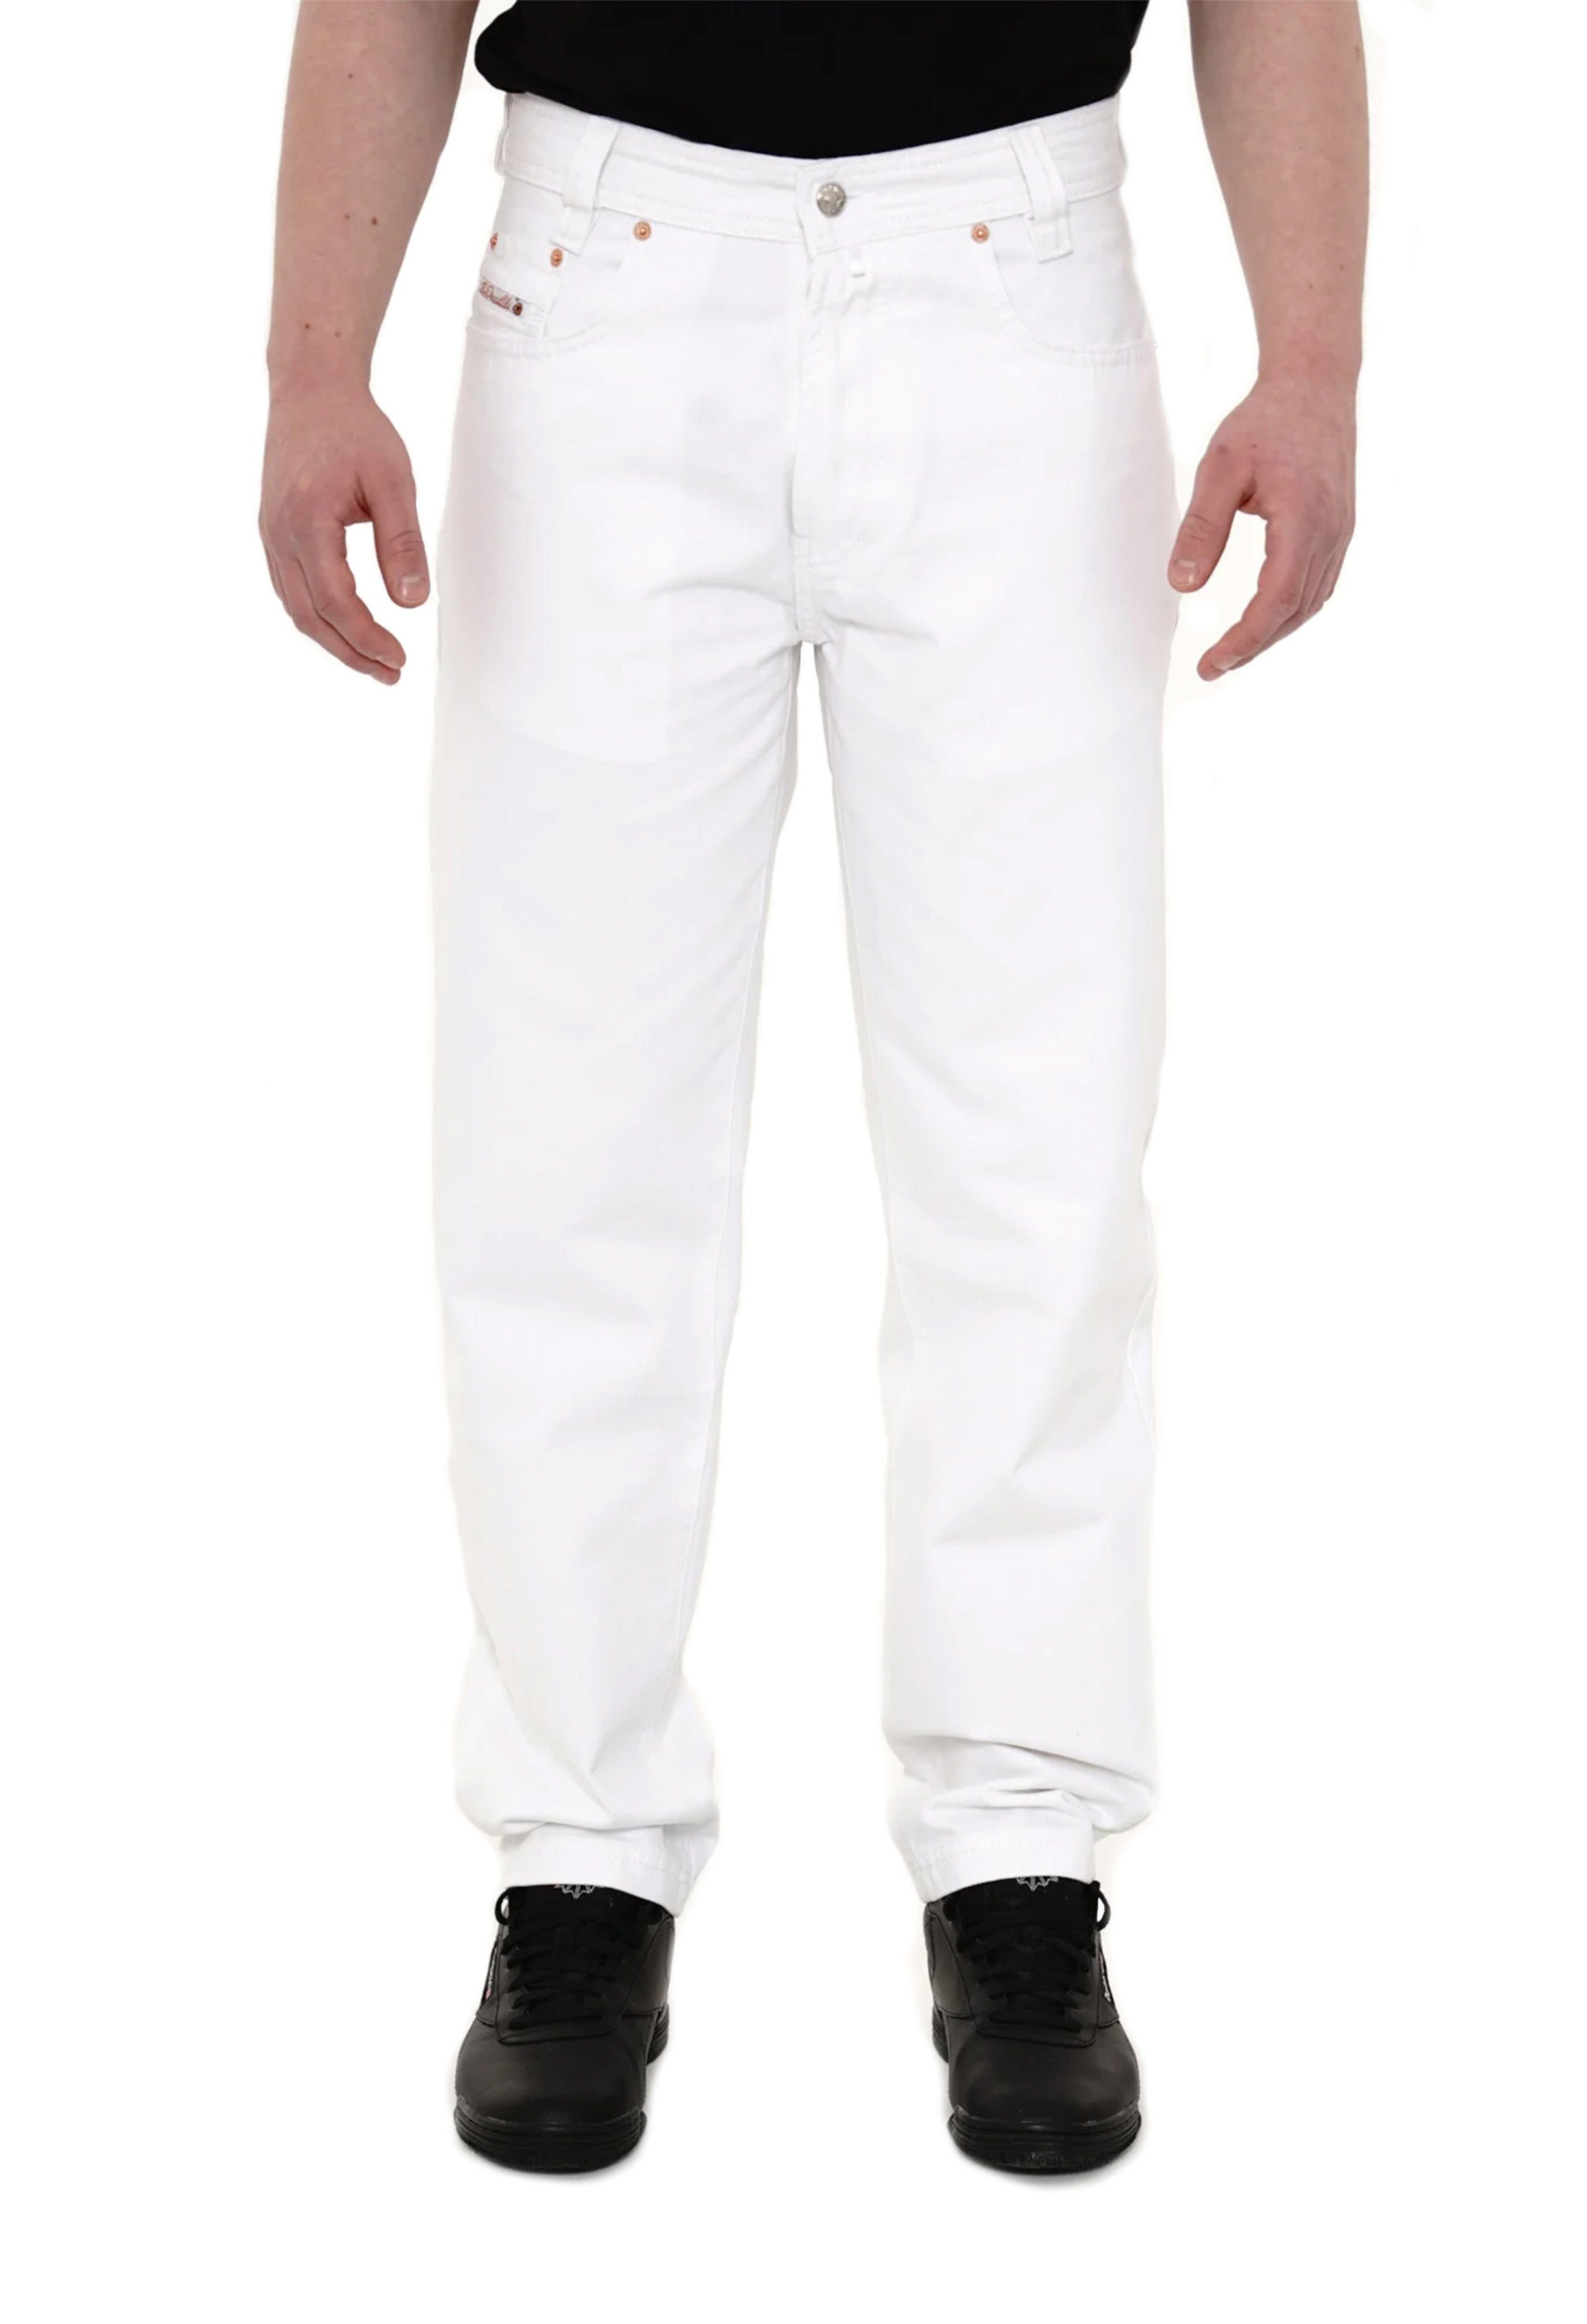 konkurrenzfähiger Preis PICALDI Jeans Tapered-fit-Jeans Zicco Freizeithose Gabardine Relaxed White 472 Fit, Fit, Loose Sommerhose